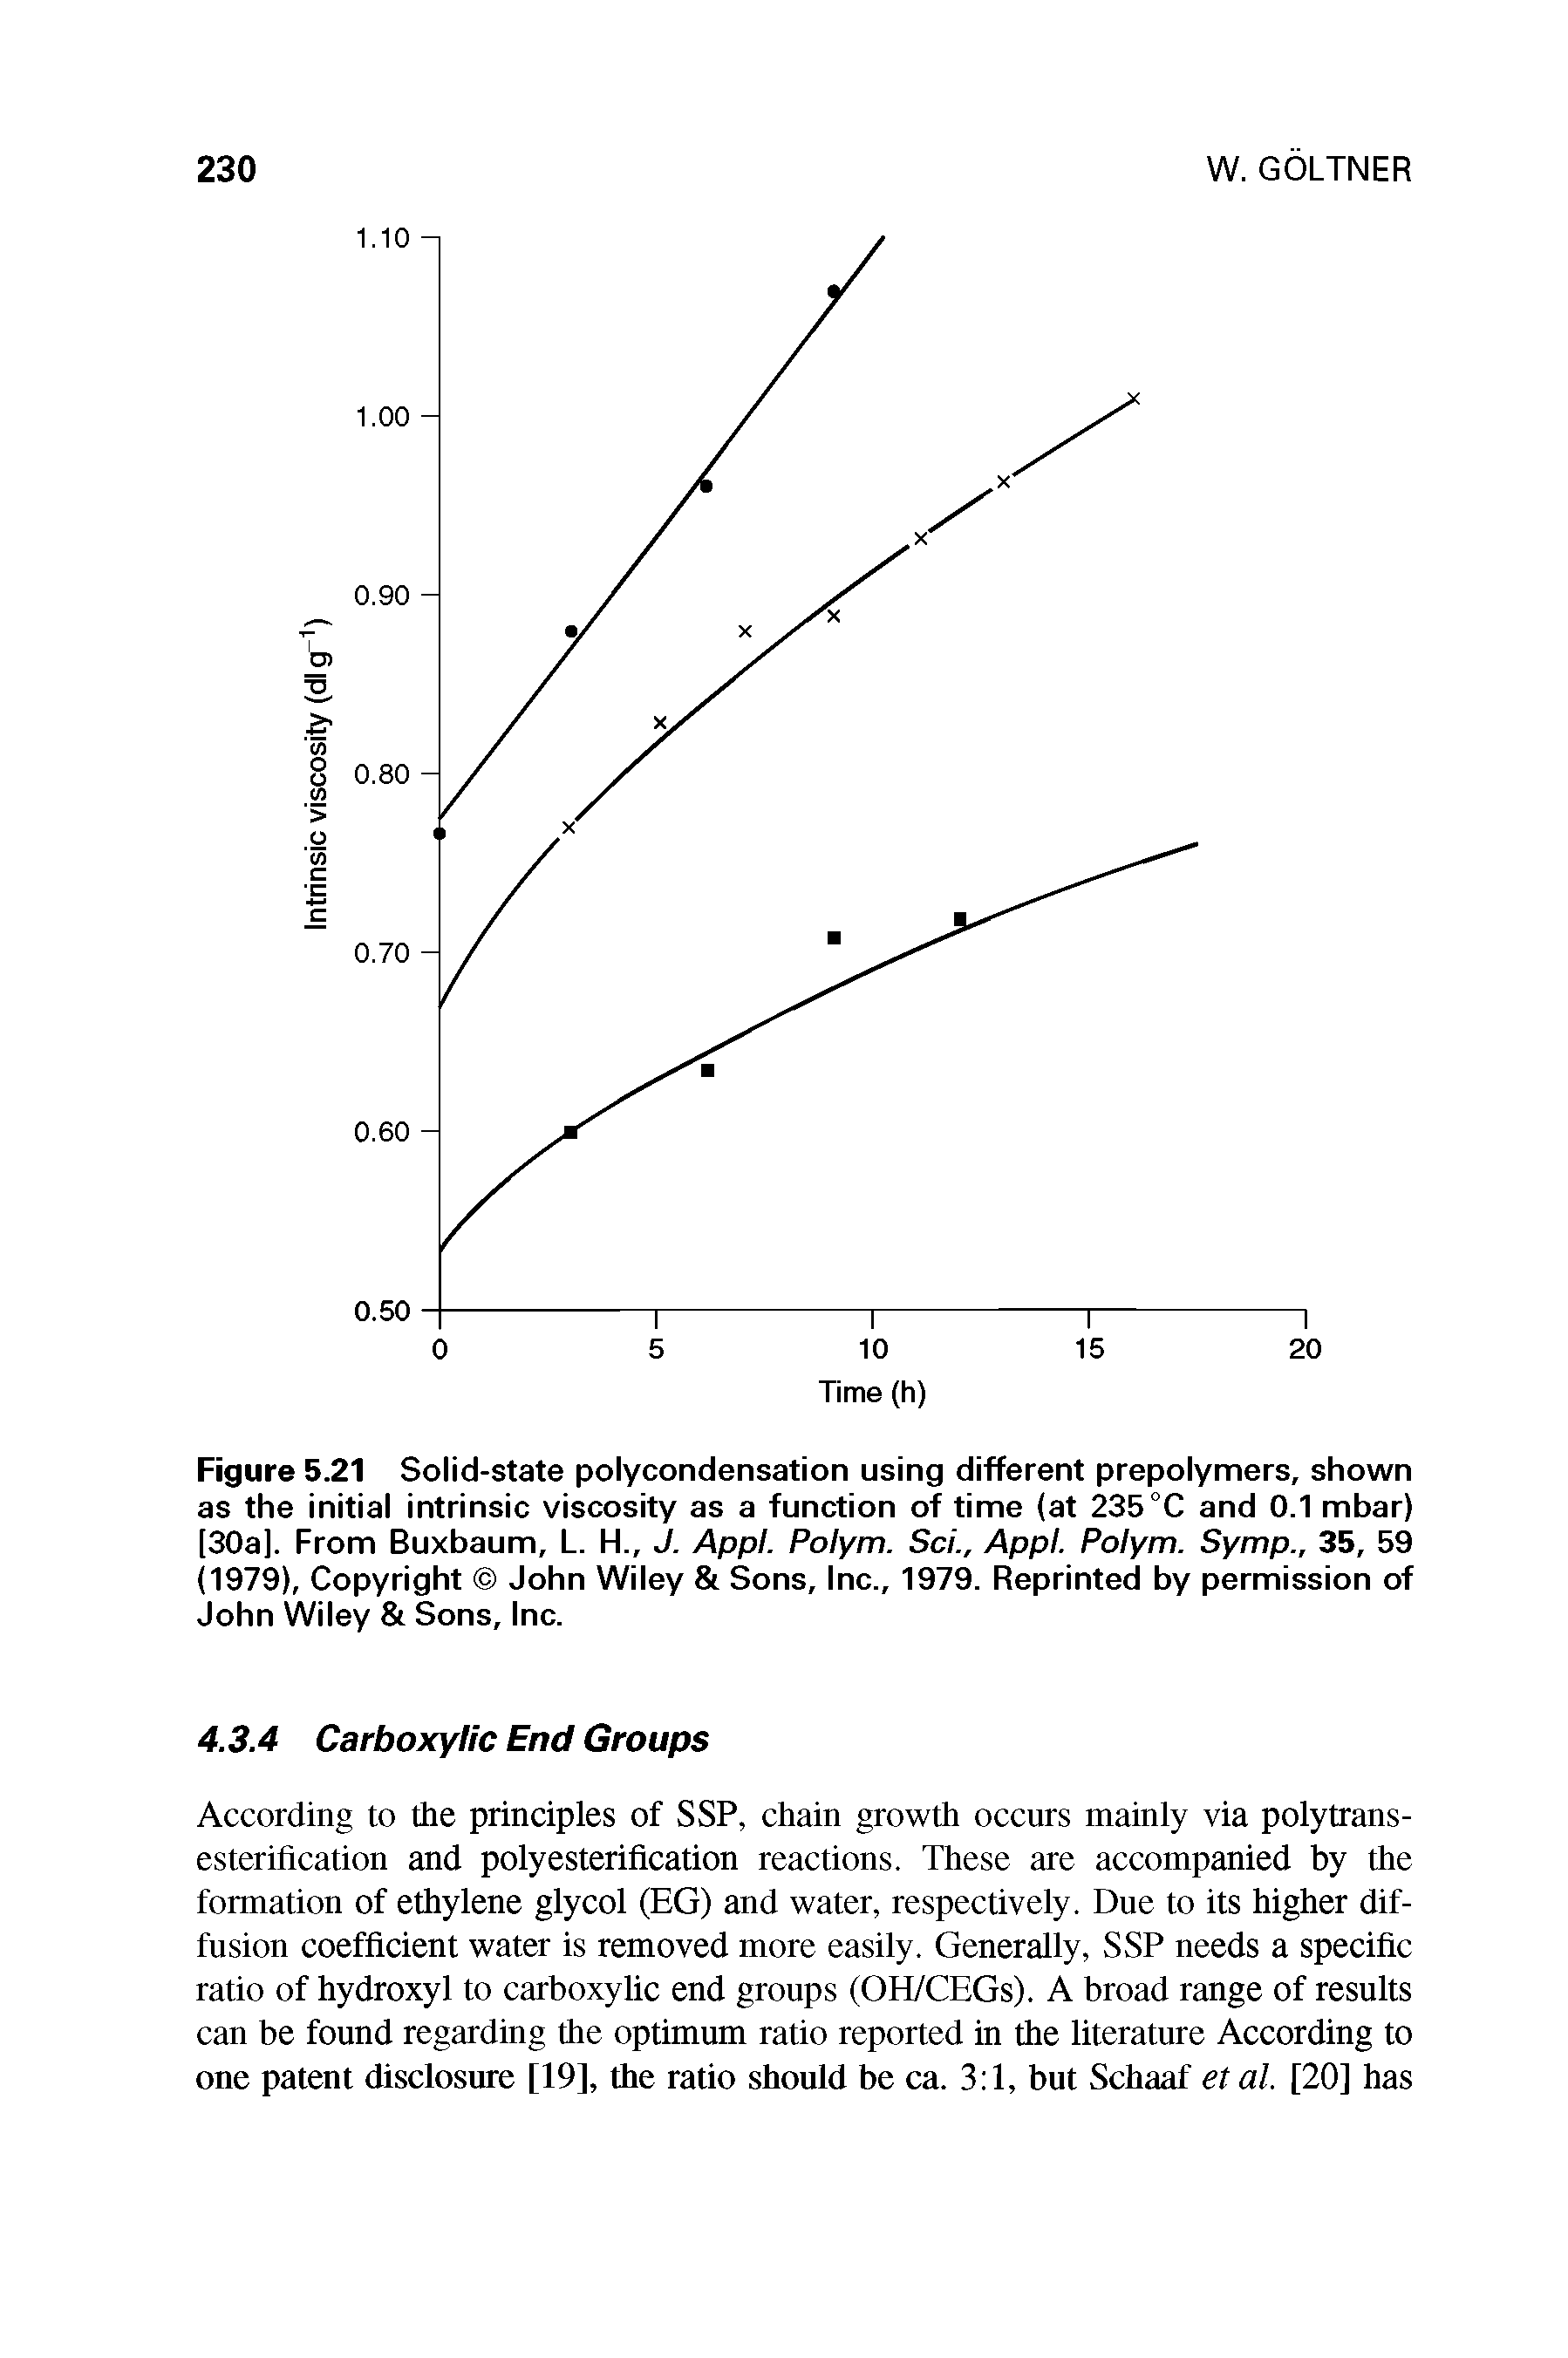 Figure 5.21 Solid-state polycondensation using different prepolymers, shown as the initial intrinsic viscosity as a function of time (at 235 °C and 0.1 mbar) [30a]. From Buxbaum, L. H., J. Appl. Polym. Sci., Appl. Polym. Symp., 35, 59 (1979), Copyright John Wiley Sons, Inc., 1979. Reprinted by permission of John Wiley Sons, Inc.